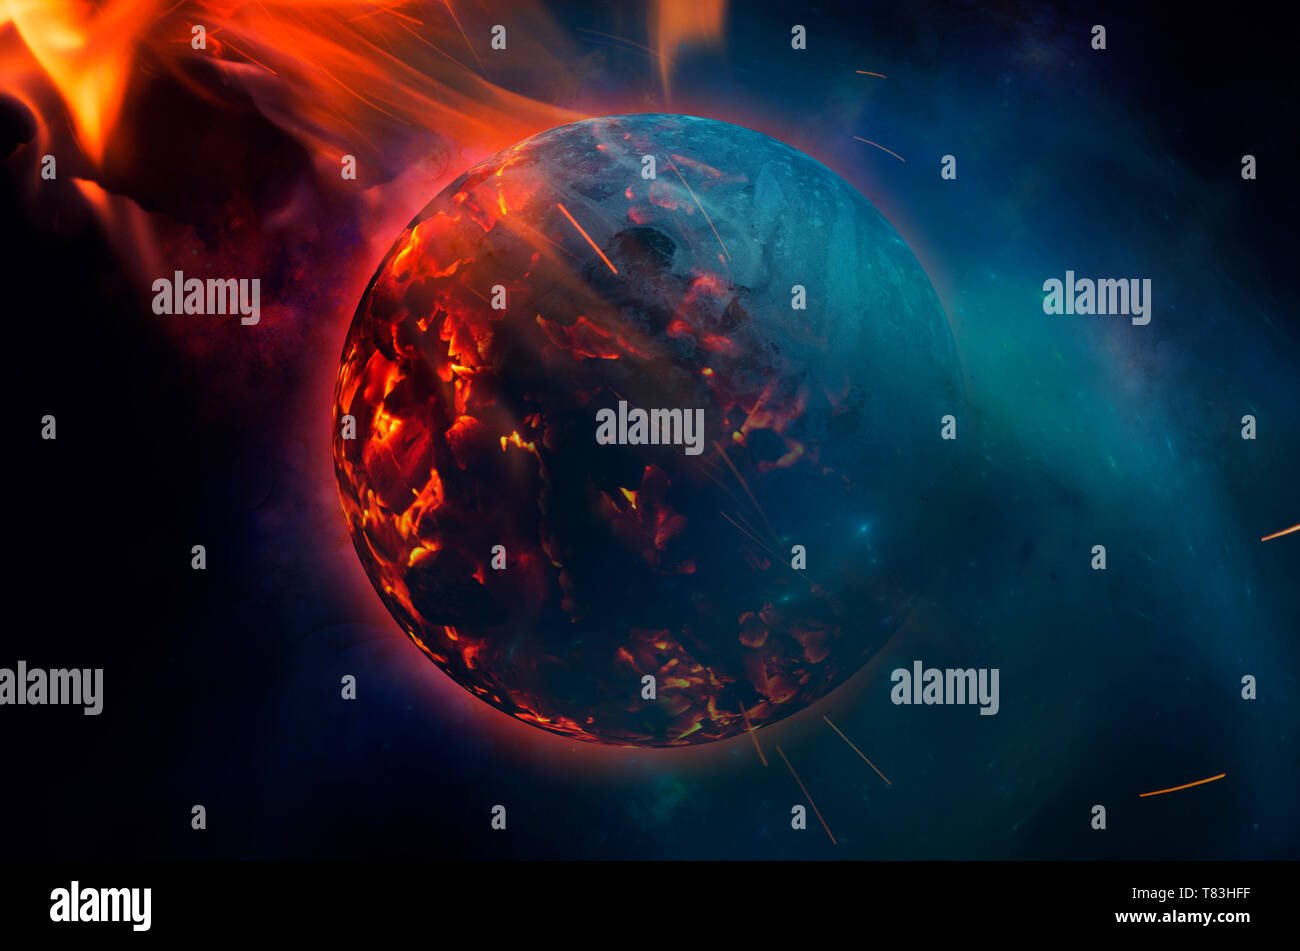 world burning concept, planet burning in space apocalyptic science fiction illustration Stock Photo